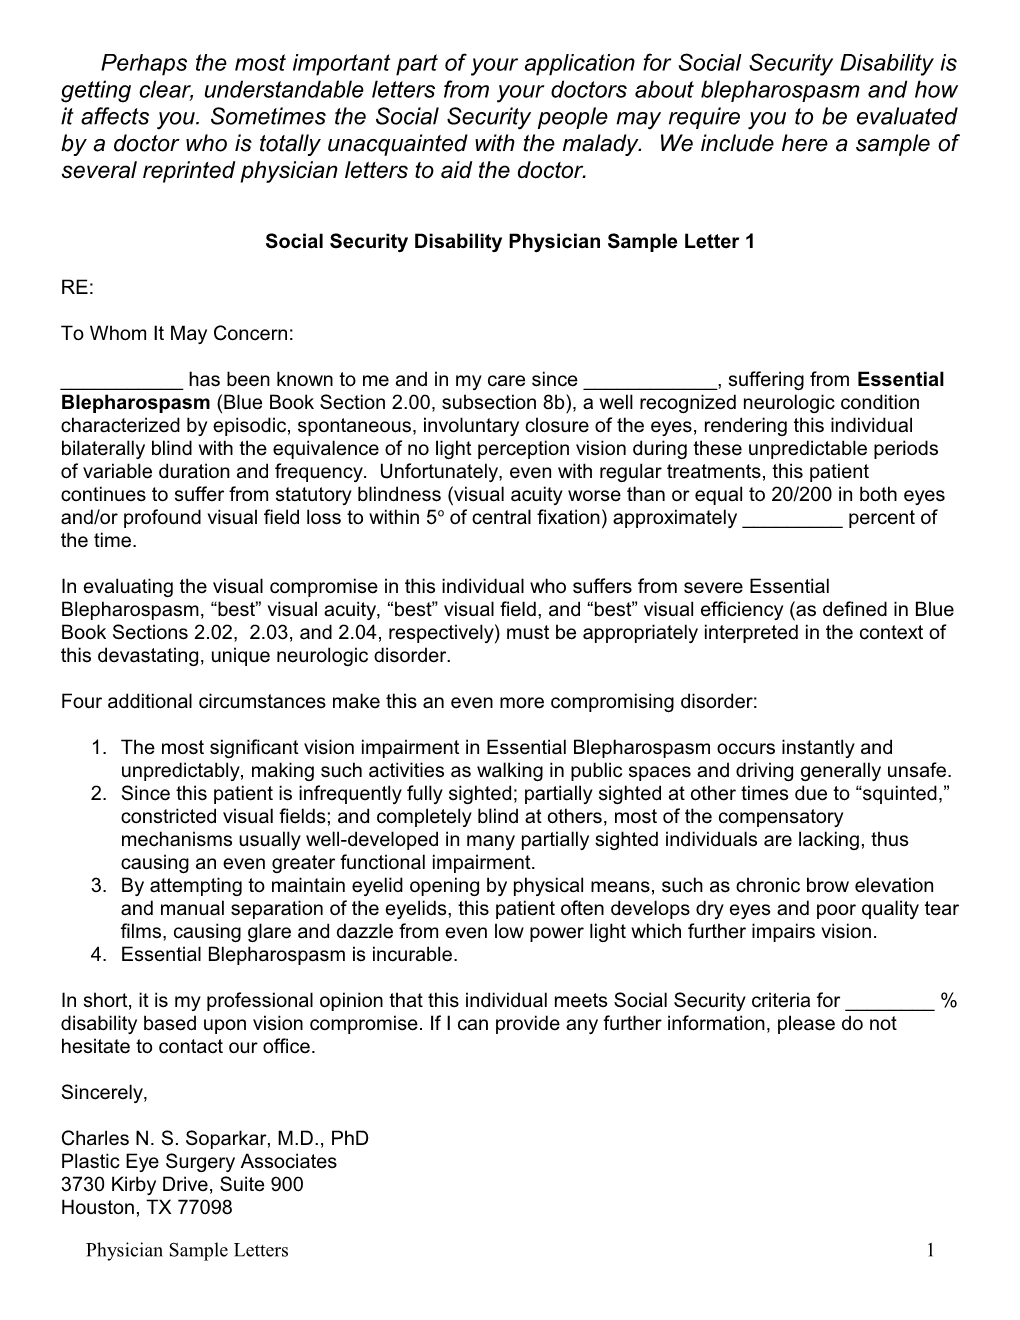 Sample Physician Letter to Social Security